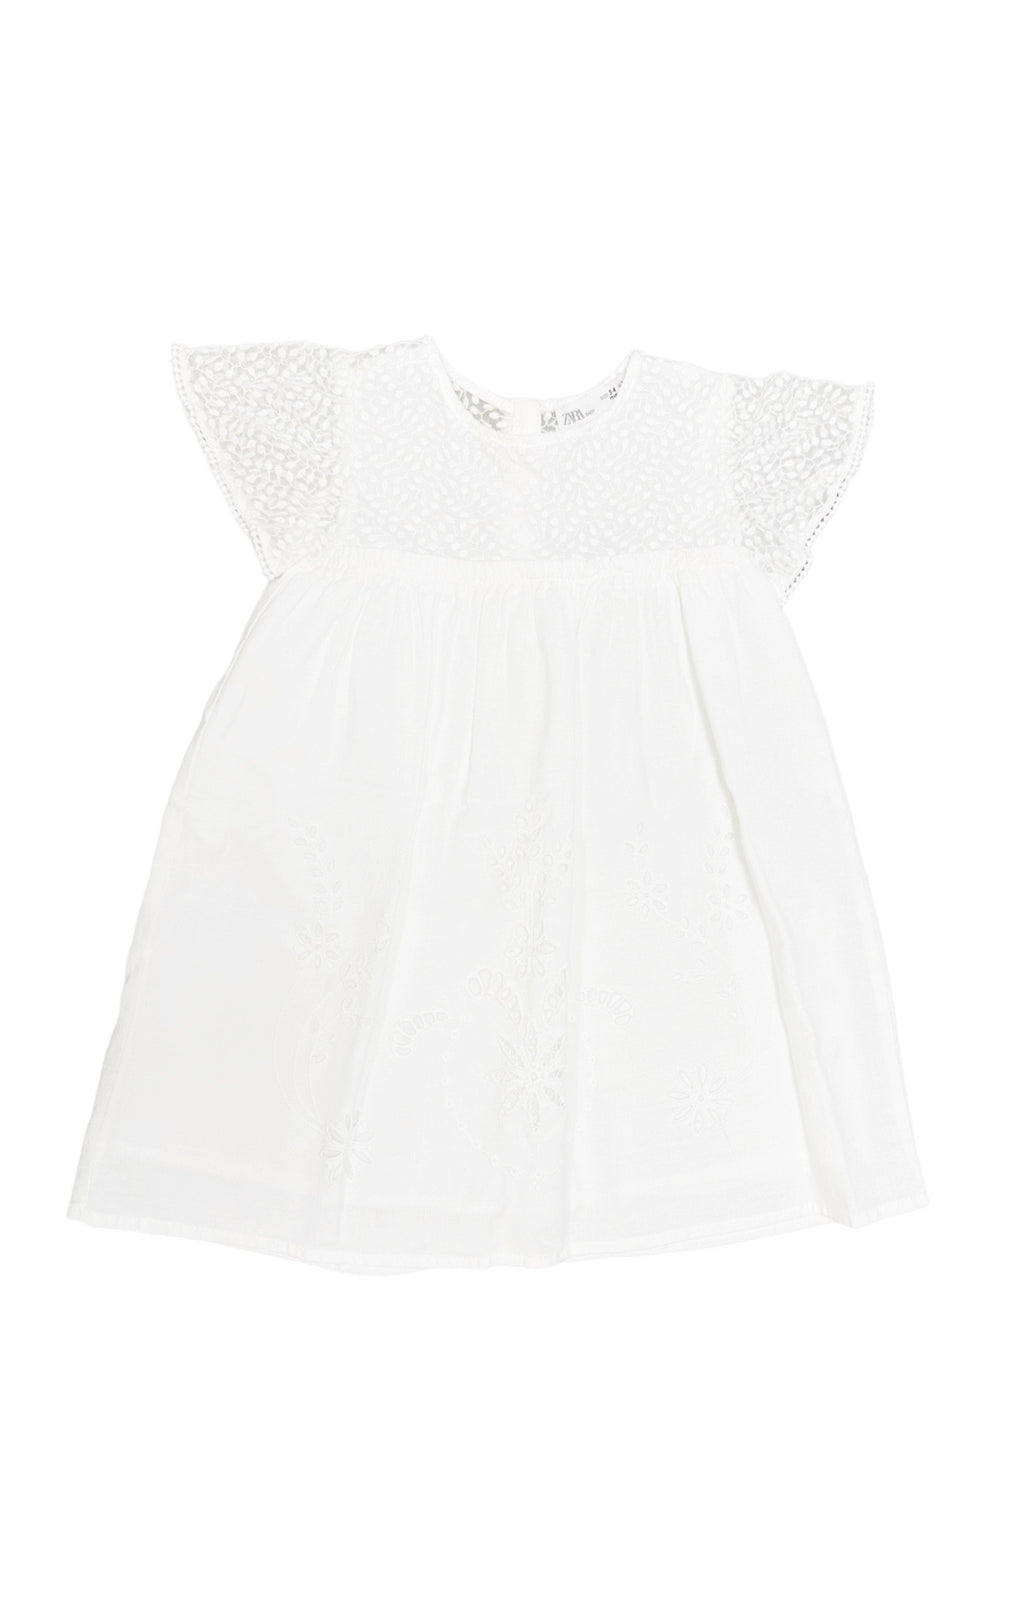 ZARA BABY (NEW) with tags Dress Size: 3-4 Years